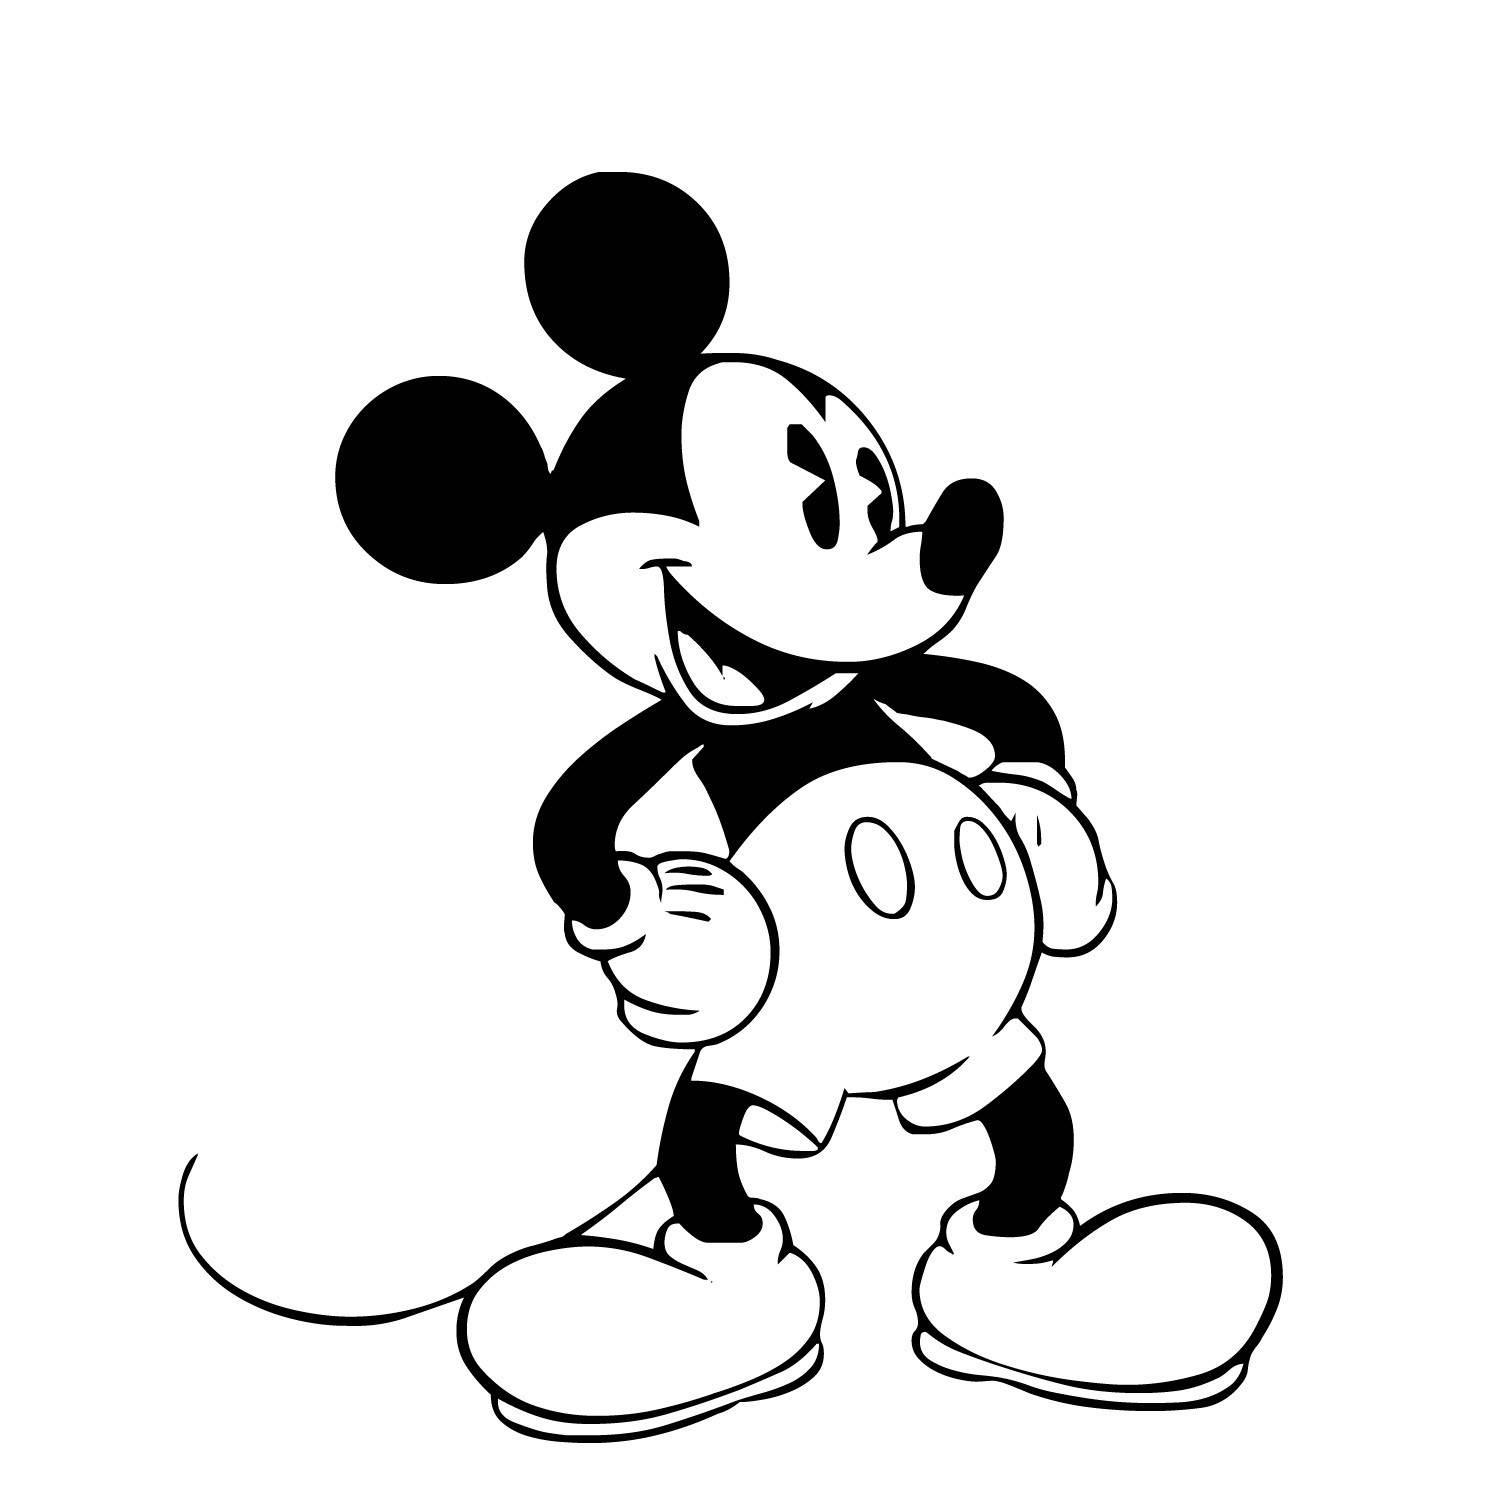 Mickey mouse  black and white black and white mickey mouse clipart